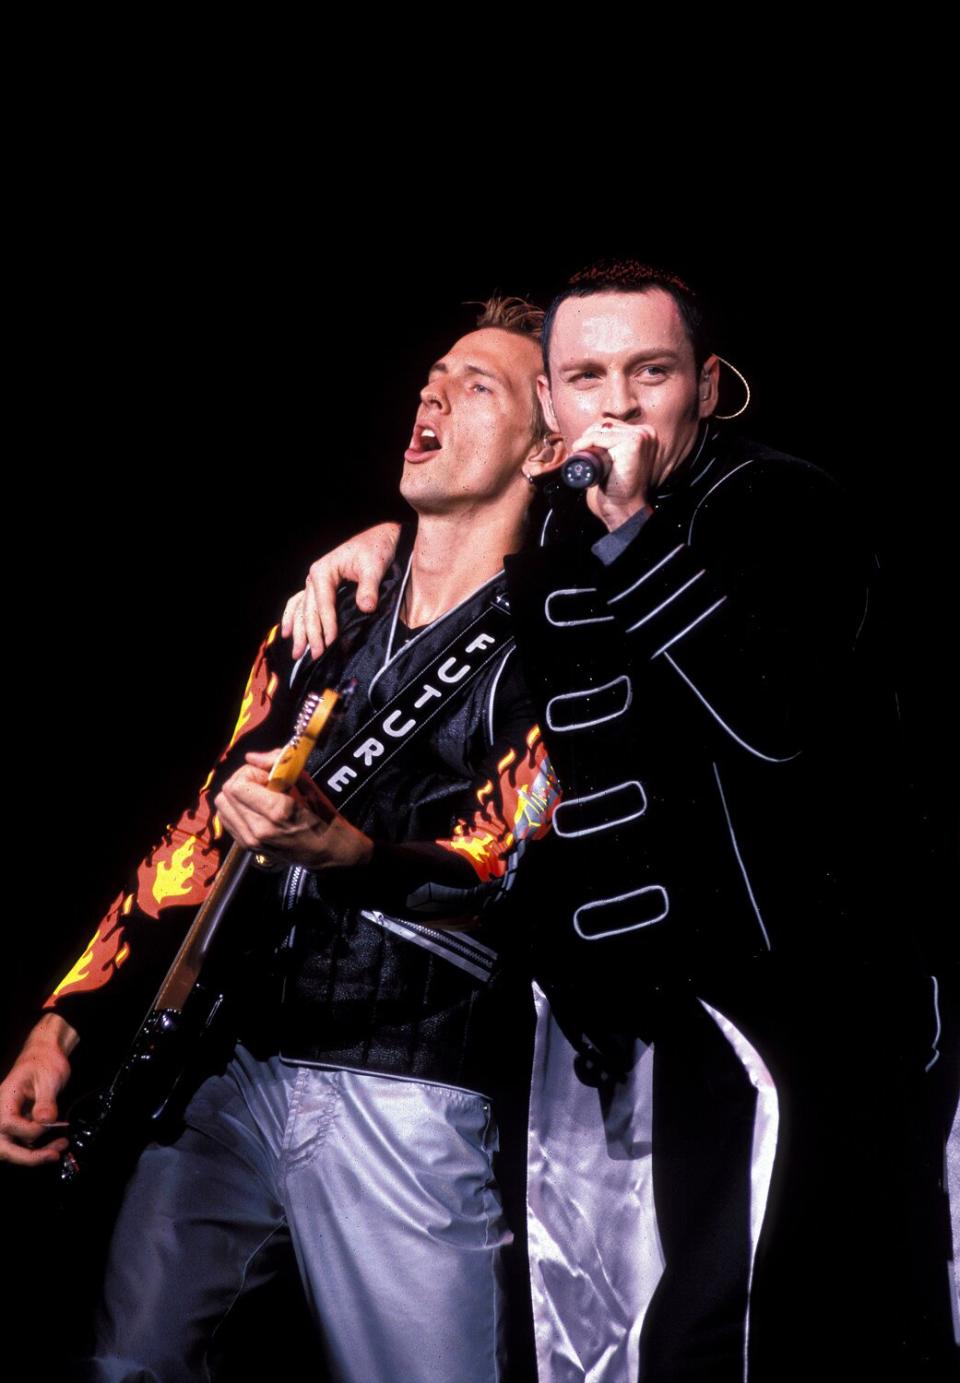 Daniel Jones and Darren Hayes of Savage Garden perform on stage at Melbourne Glasshouse in 1998 in Melbourne, Australia.